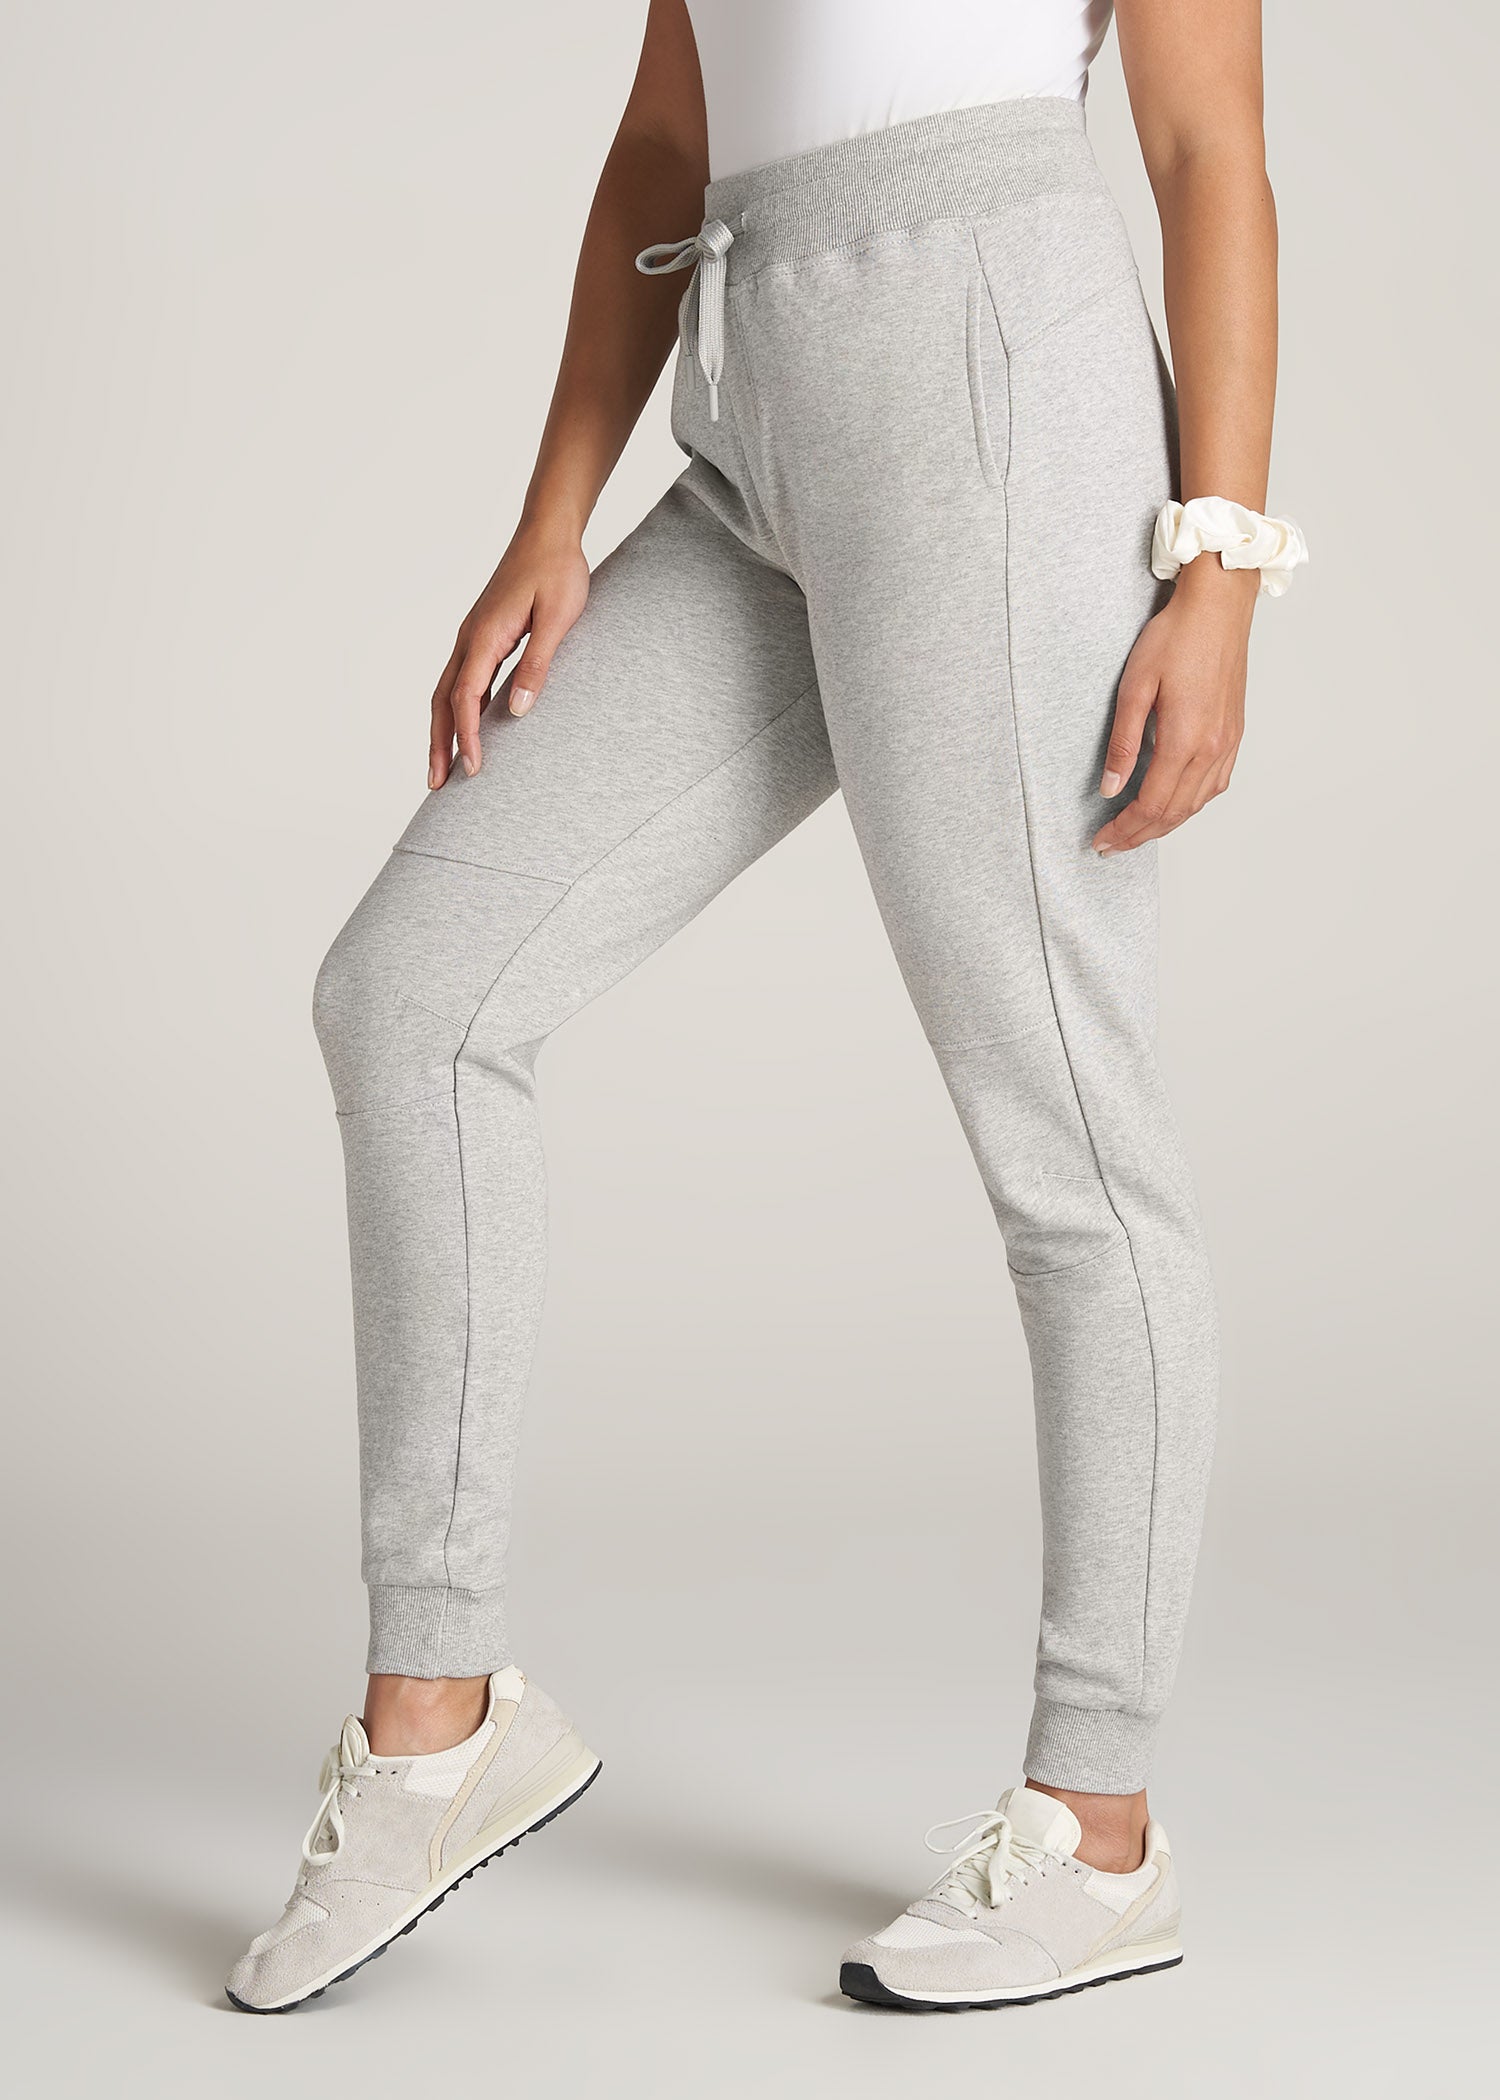    American-Tall-Women-FrenchTerry-Jogger-GreyMix-side